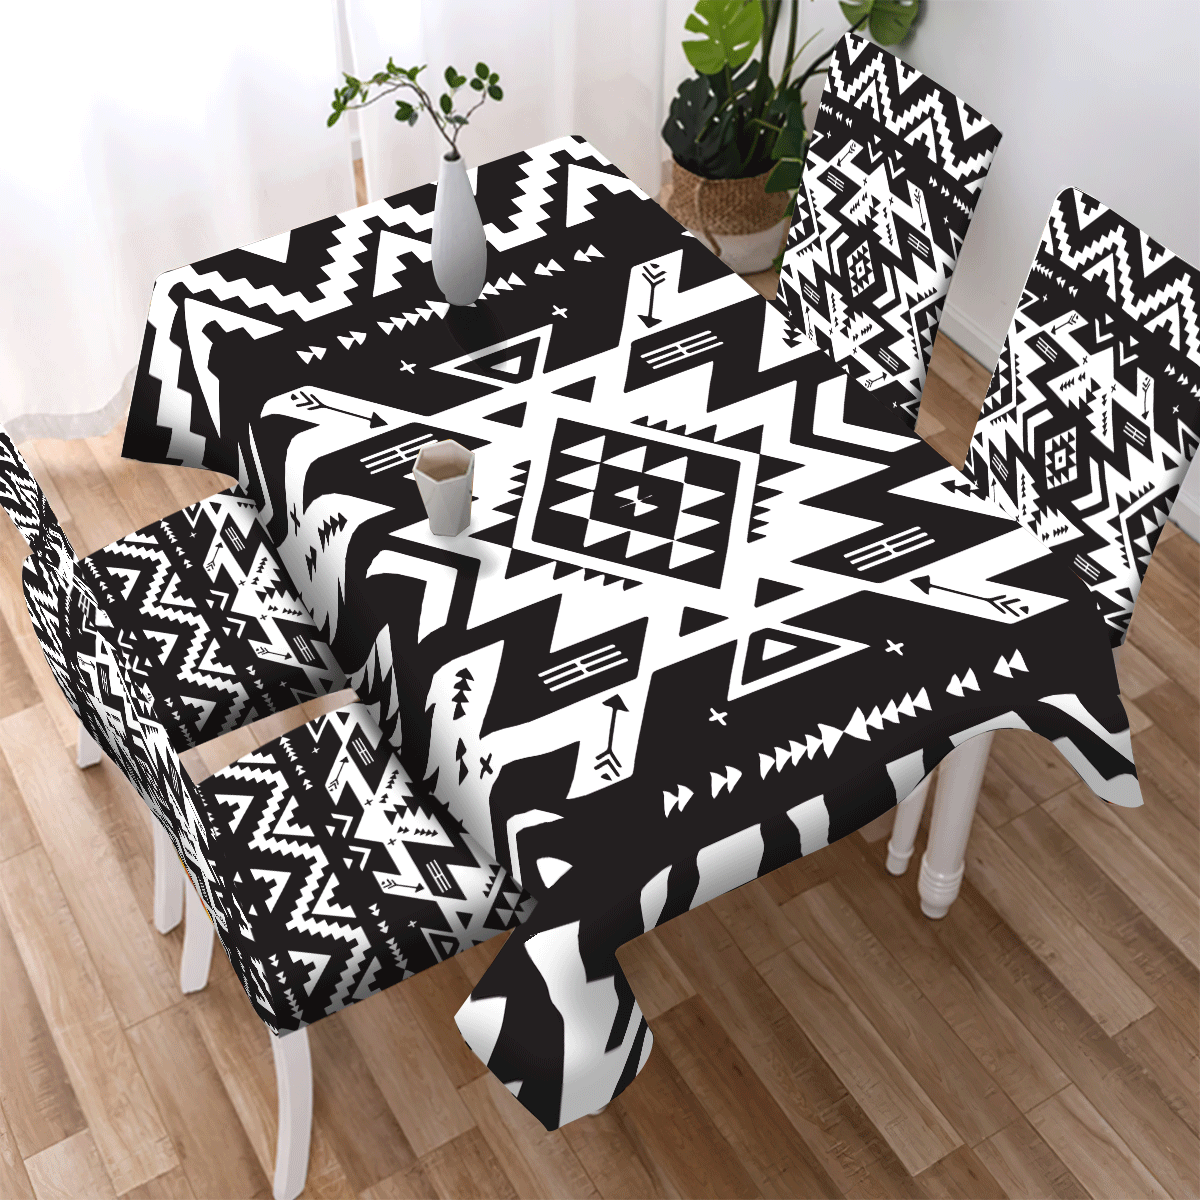 WelcomeNative Blackwhite Pattern Design Native American Tablecloth, Chair cover, 3D Tablecloth, All Over Print